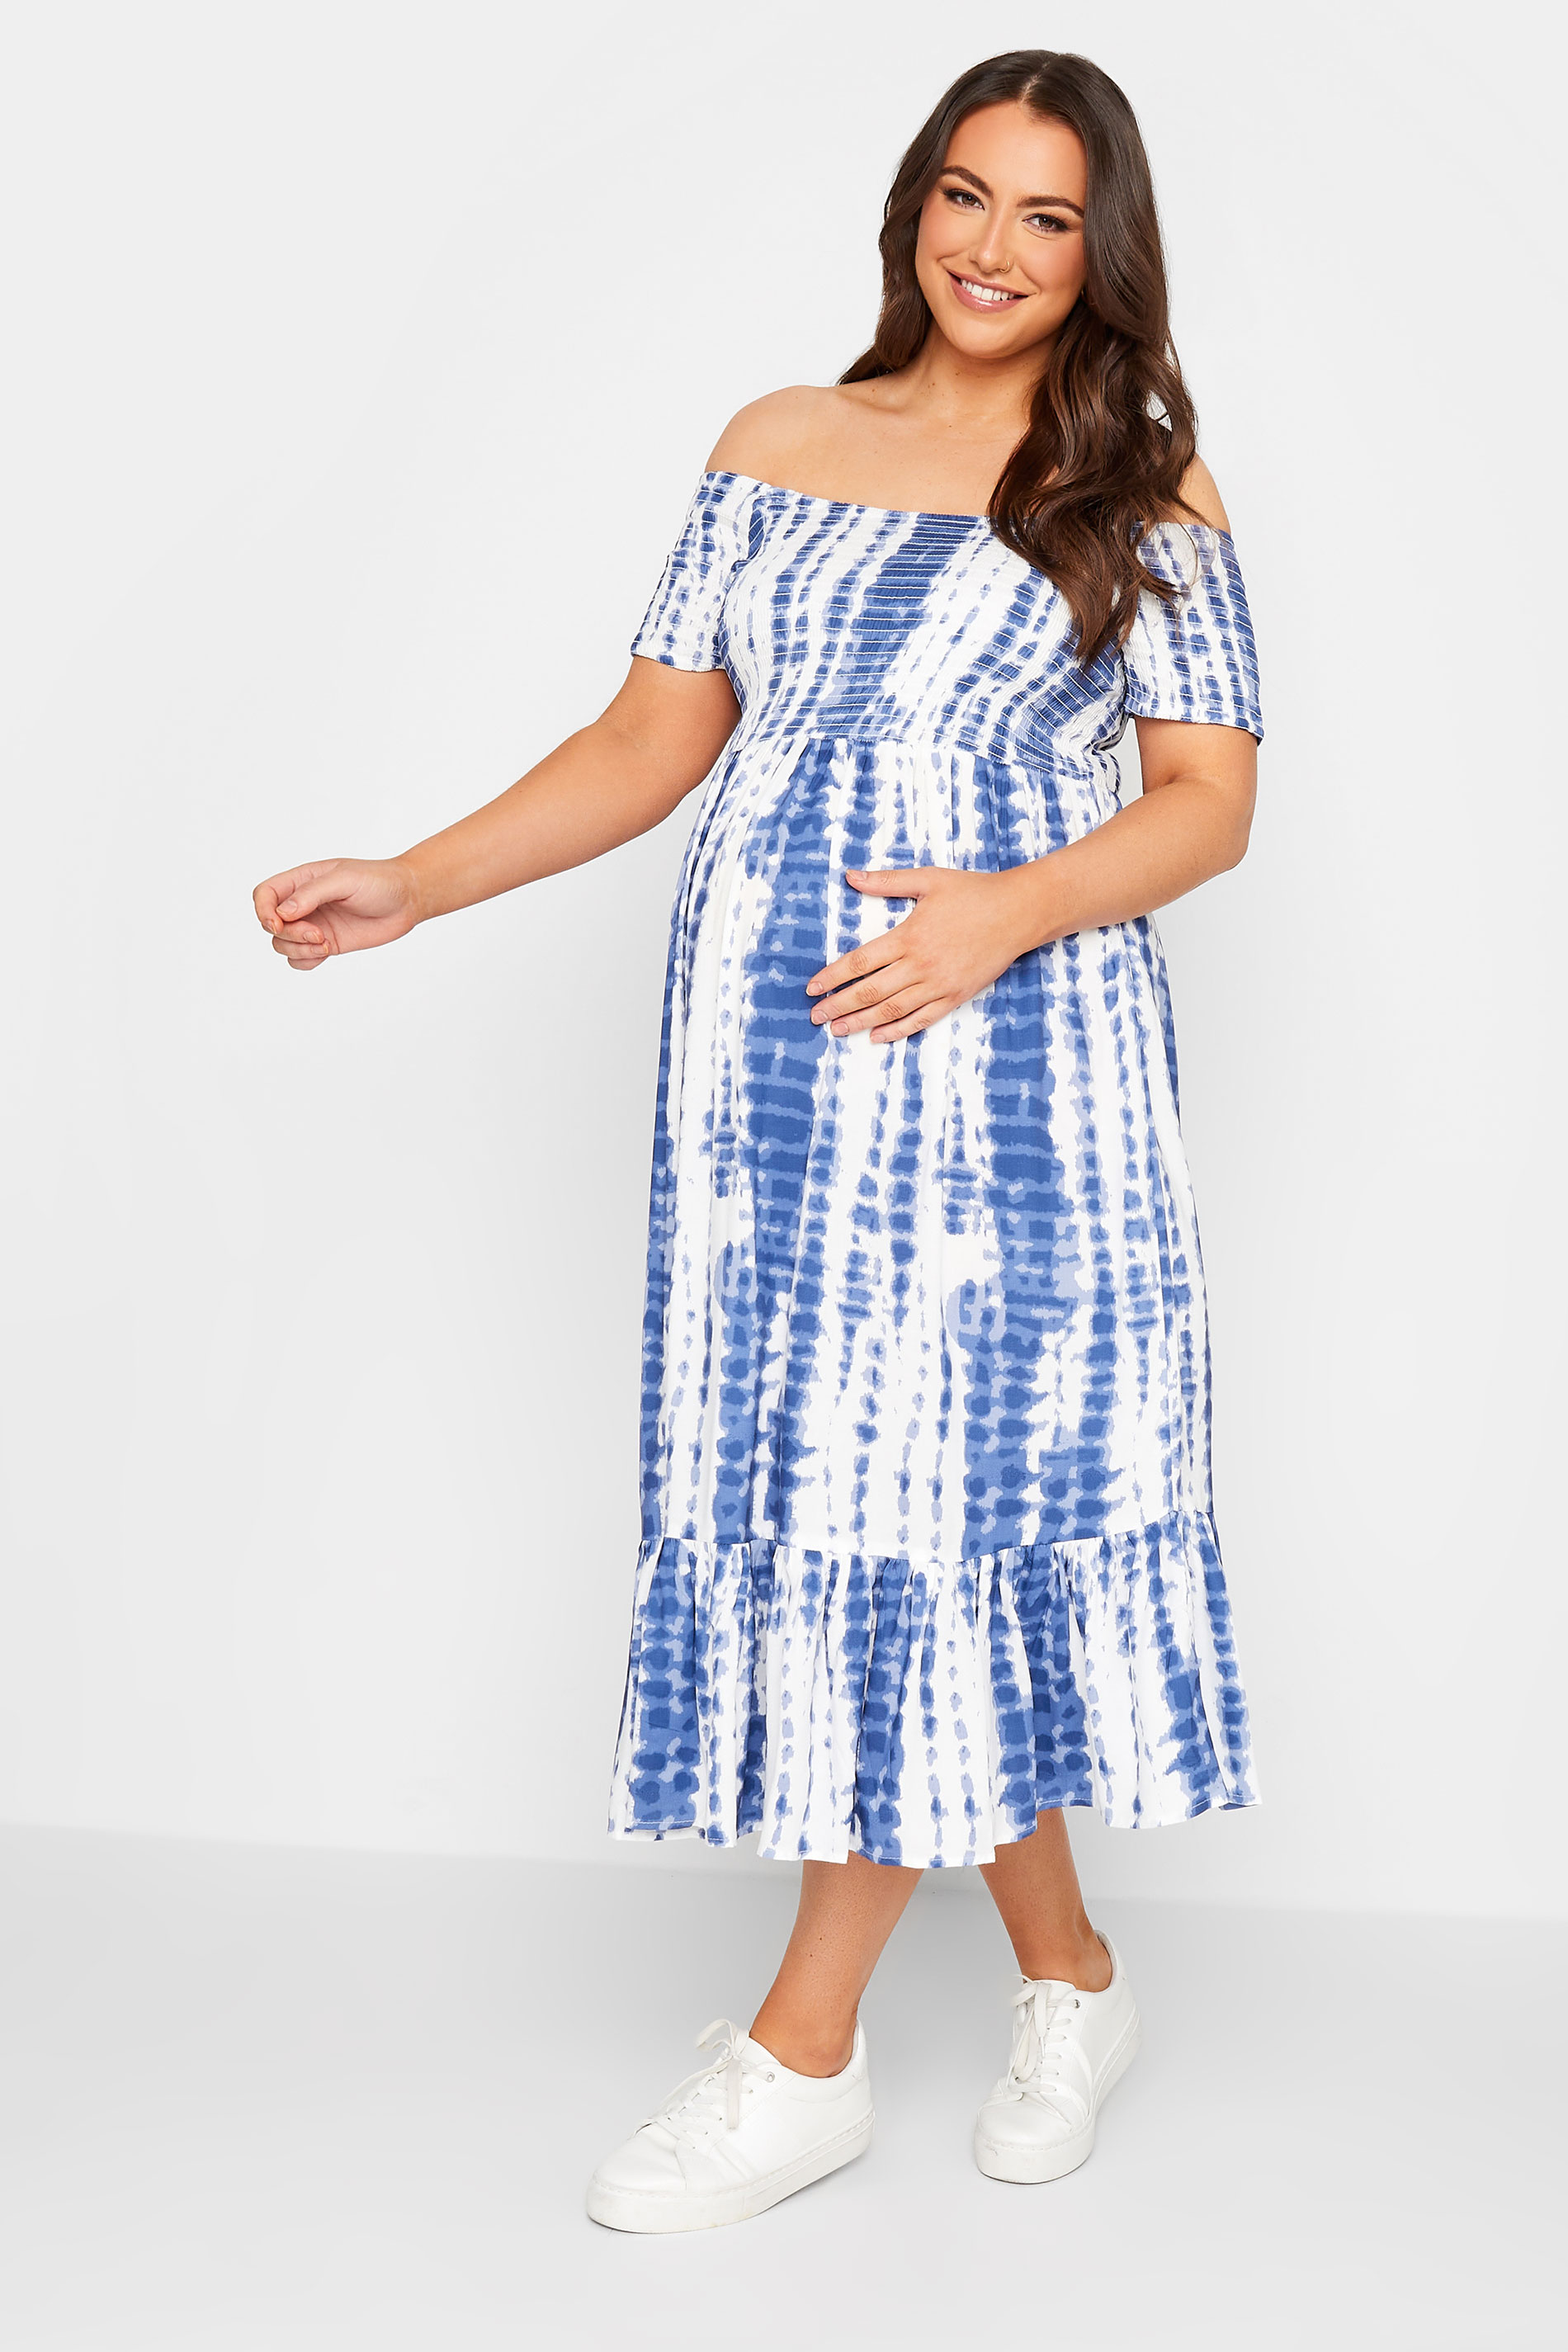 BUMP IT UP MATERNITY Plus Size Blue Tie Dye Shirred Dress | Yours Clothing 1